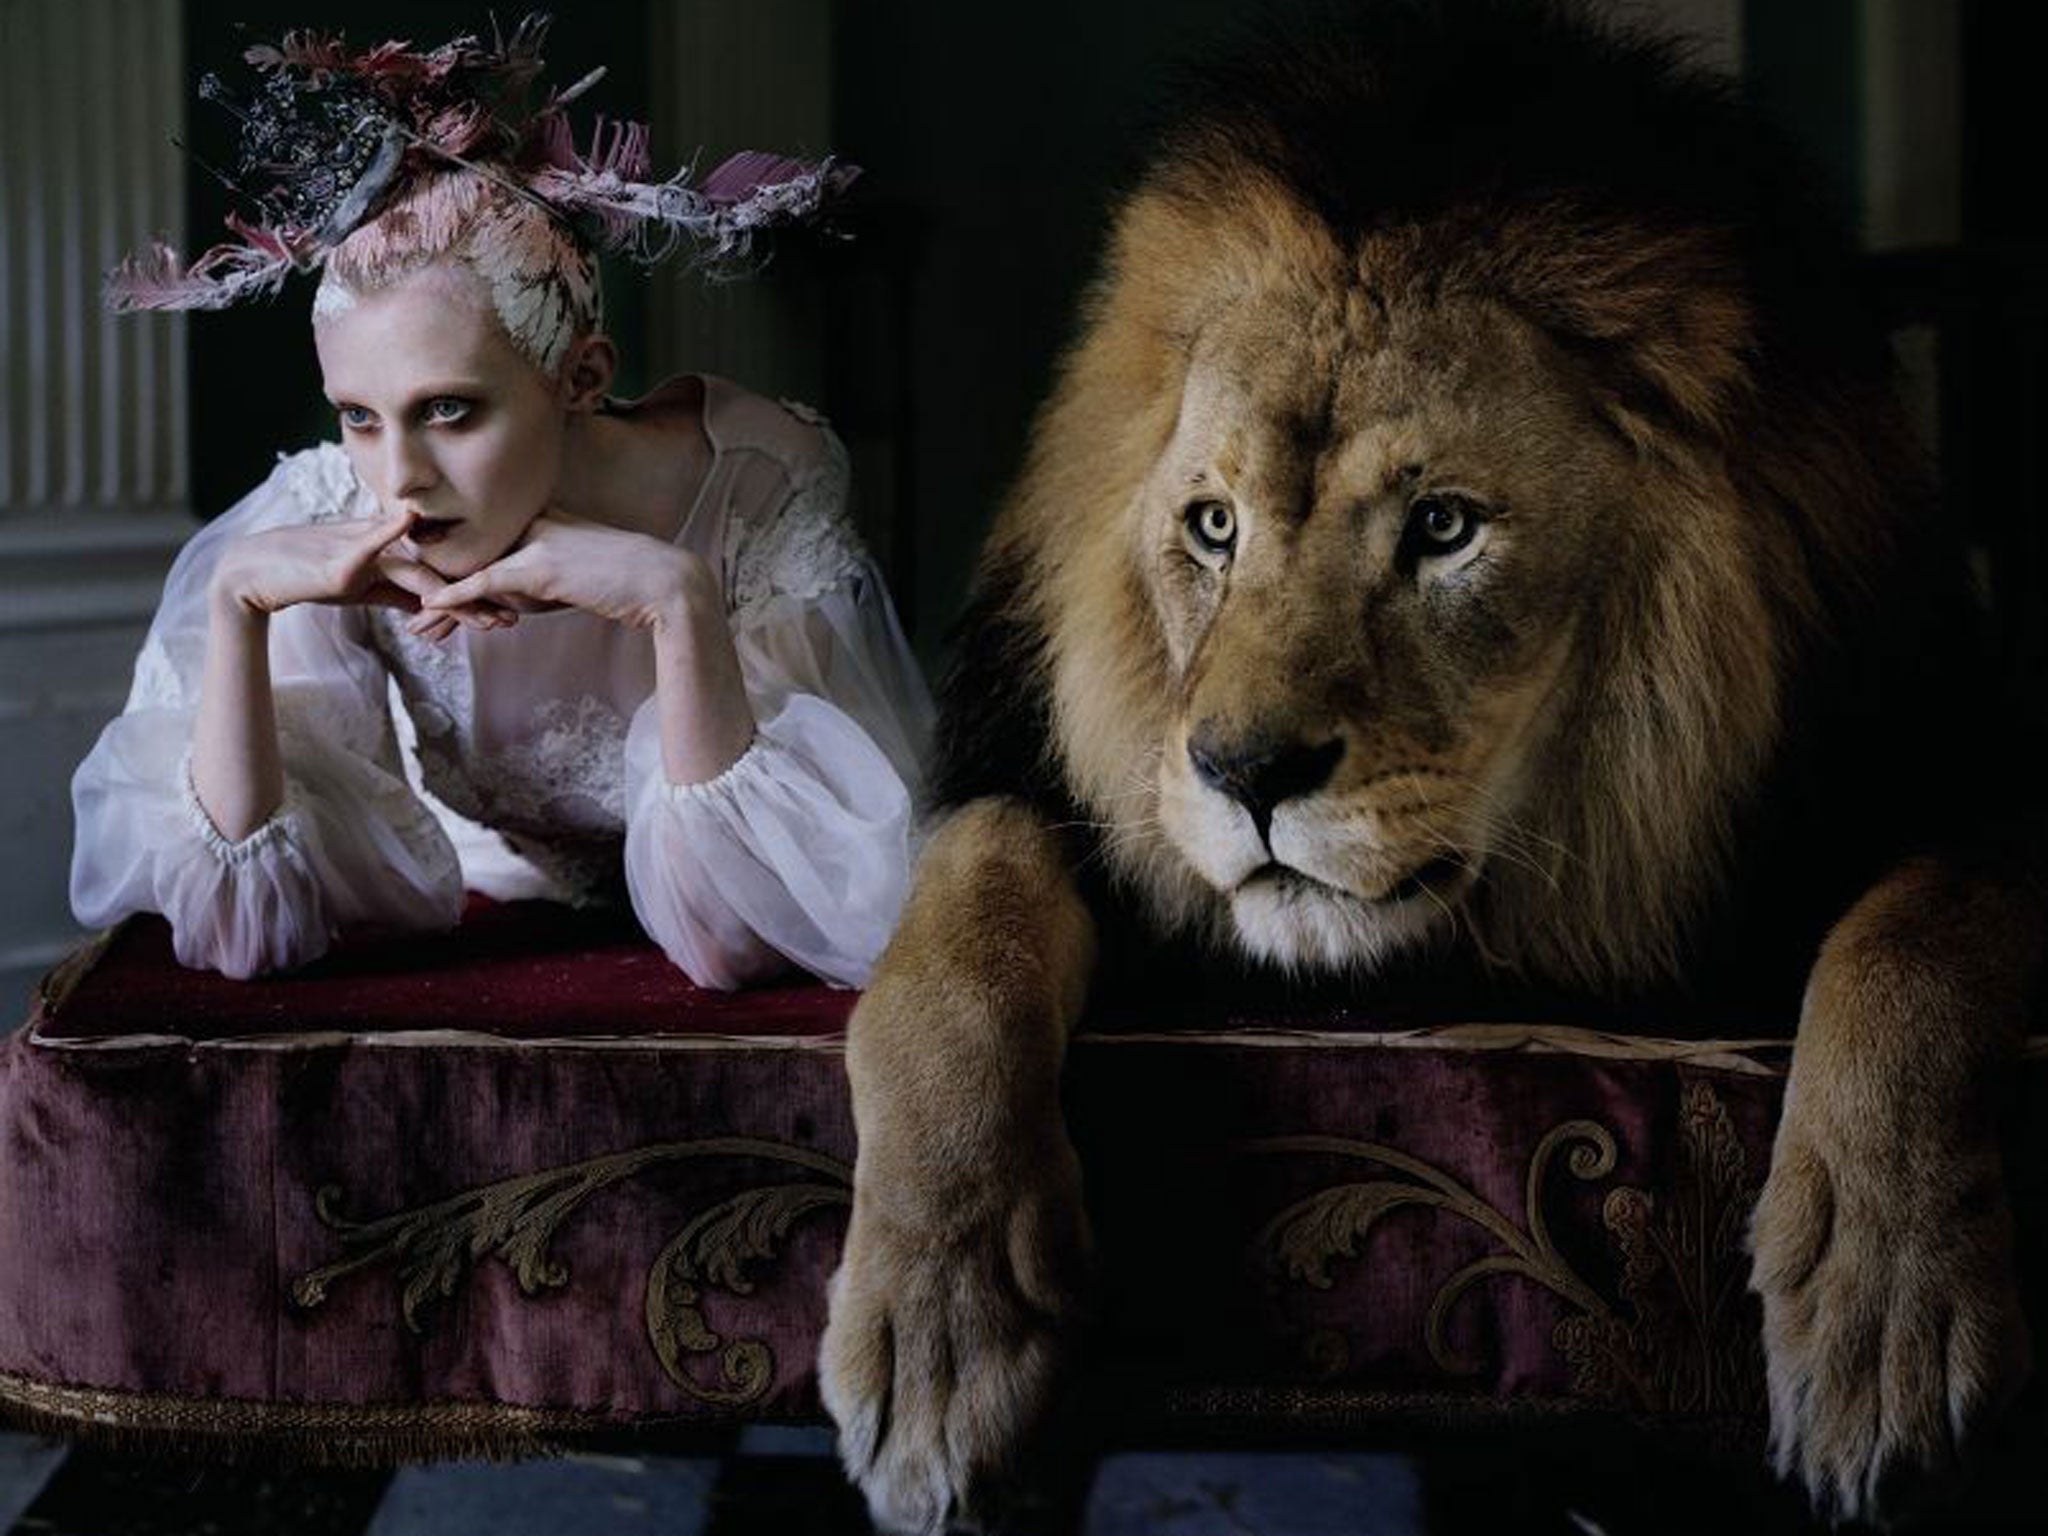 Karen Elson and Atlas the lion, photographed by Tim Walker and styled by Katie Grand